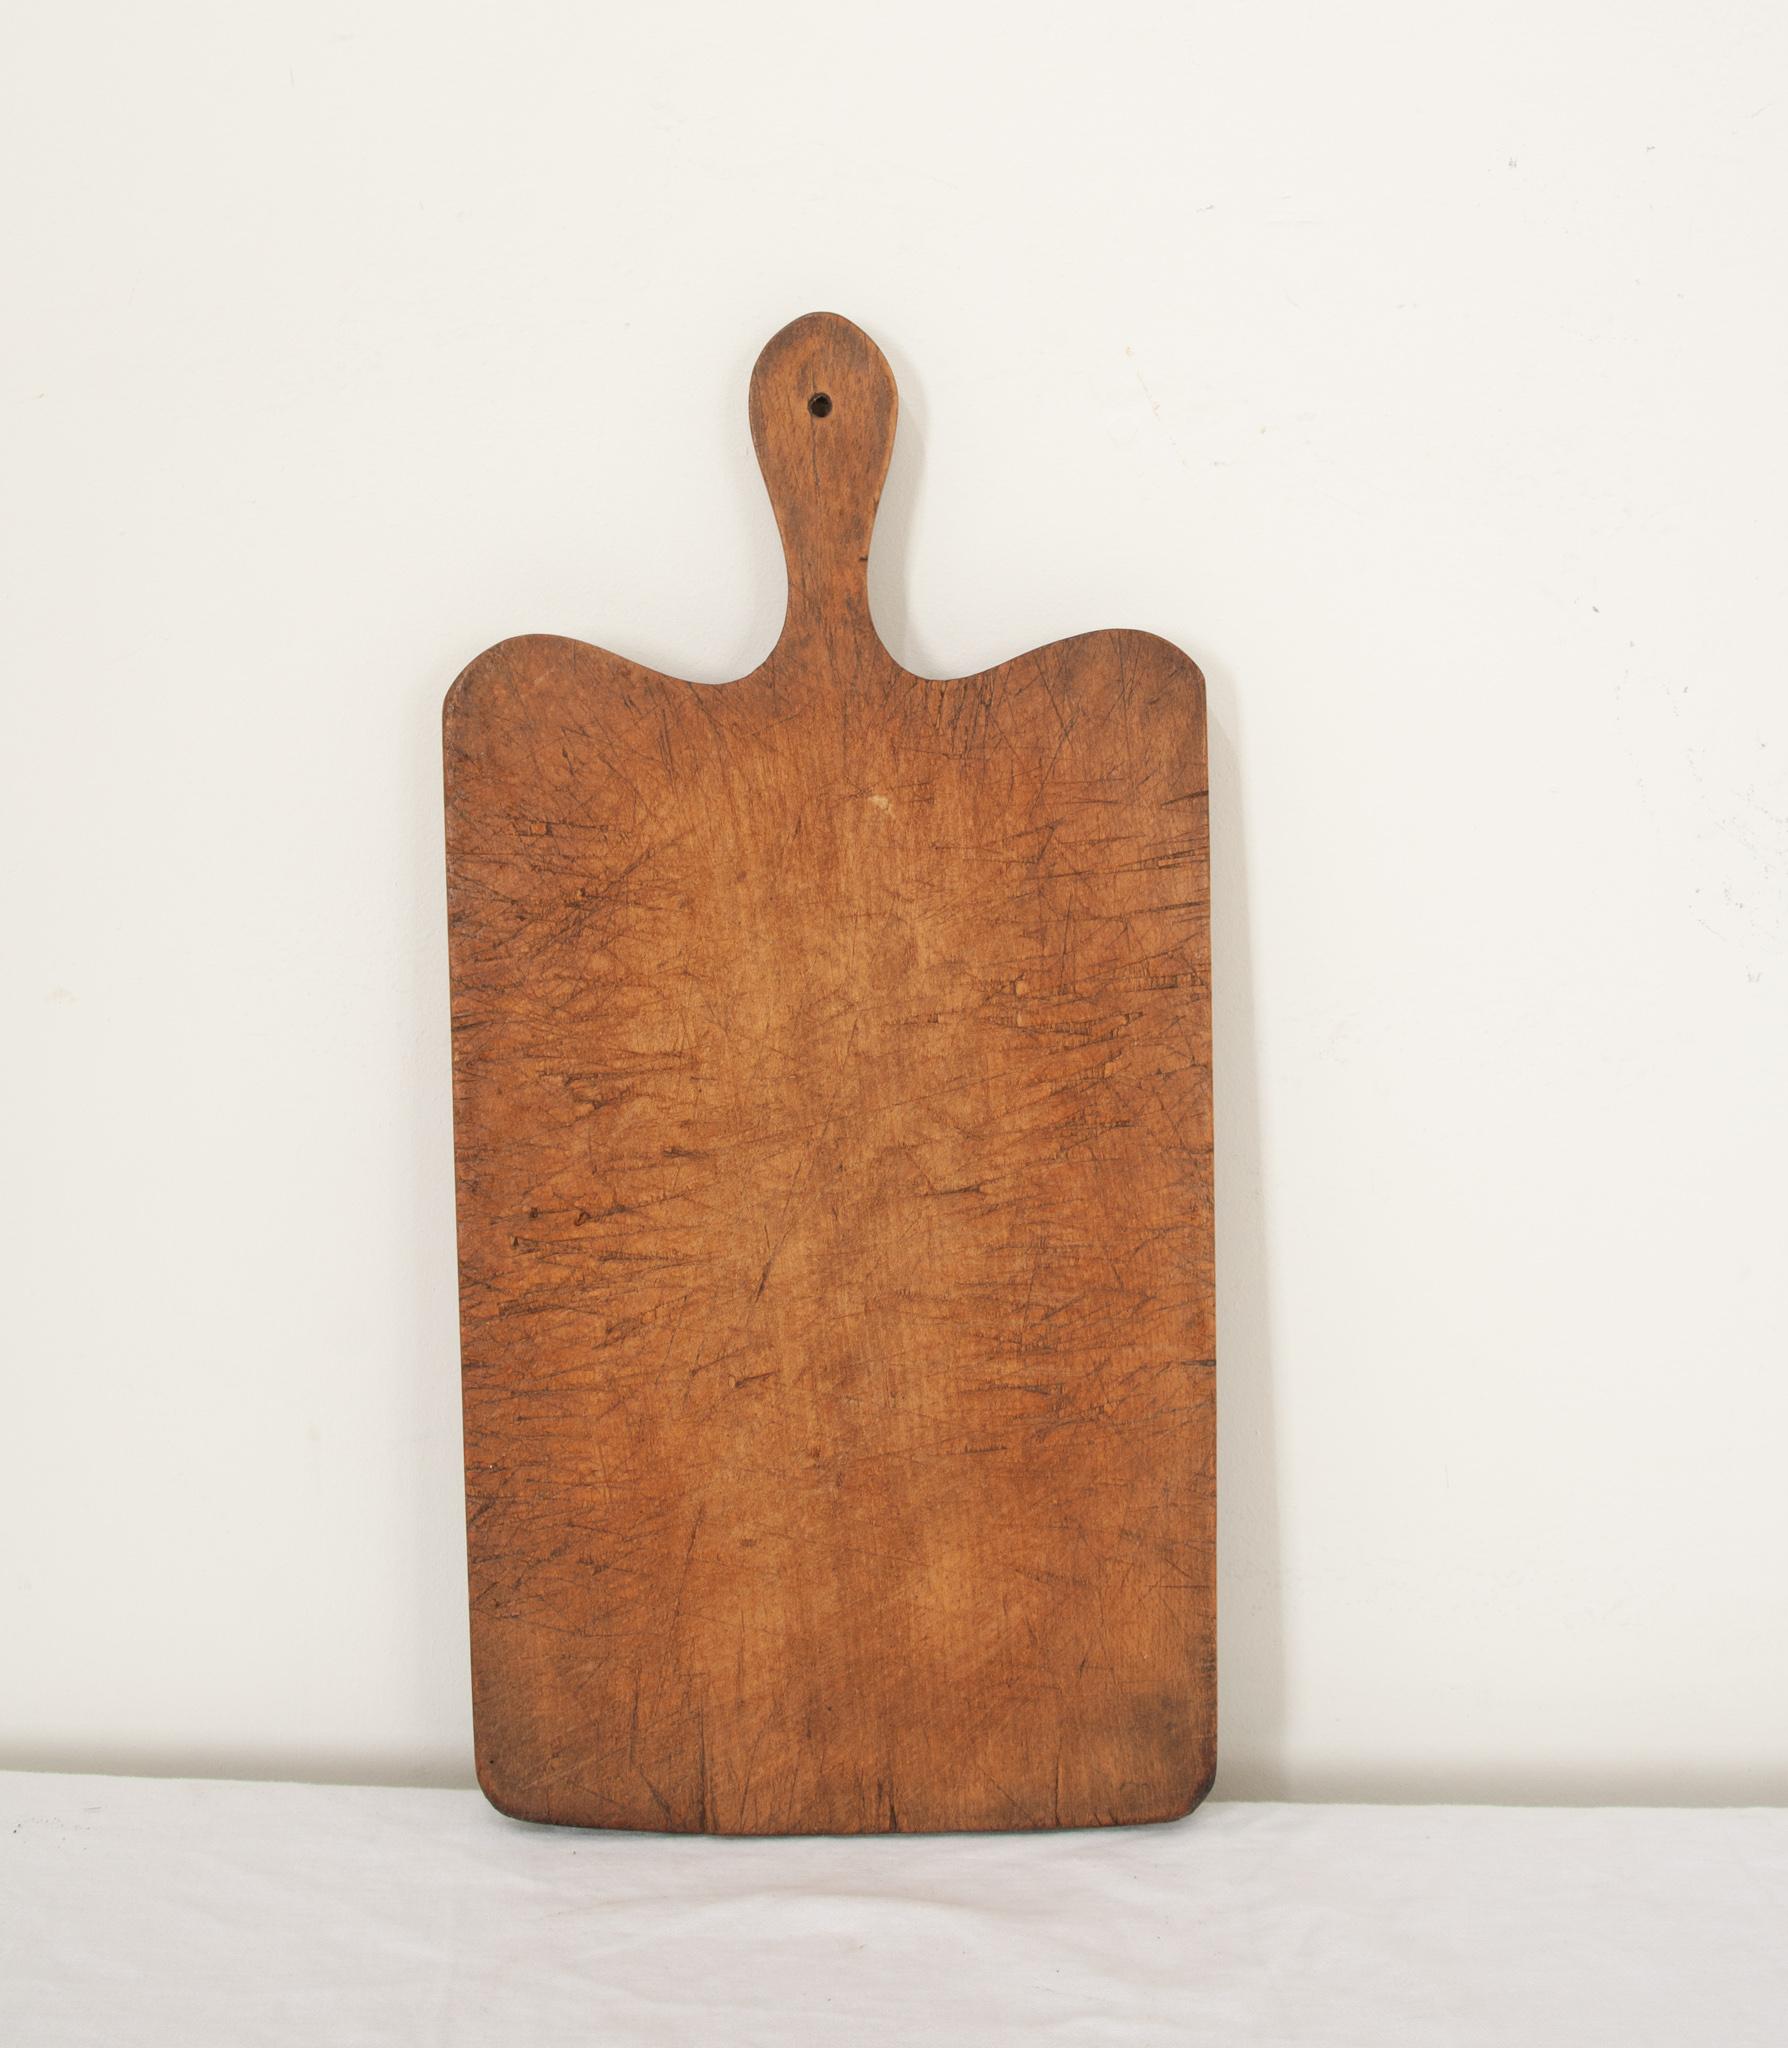 A solid wood cutting board from France in a rectangle shape with smooth corners and a handle. The worn board is made of a single piece of wood. Knife marks and scrapes that were left by cooks, now long gone, can be seen and felt as if they were made